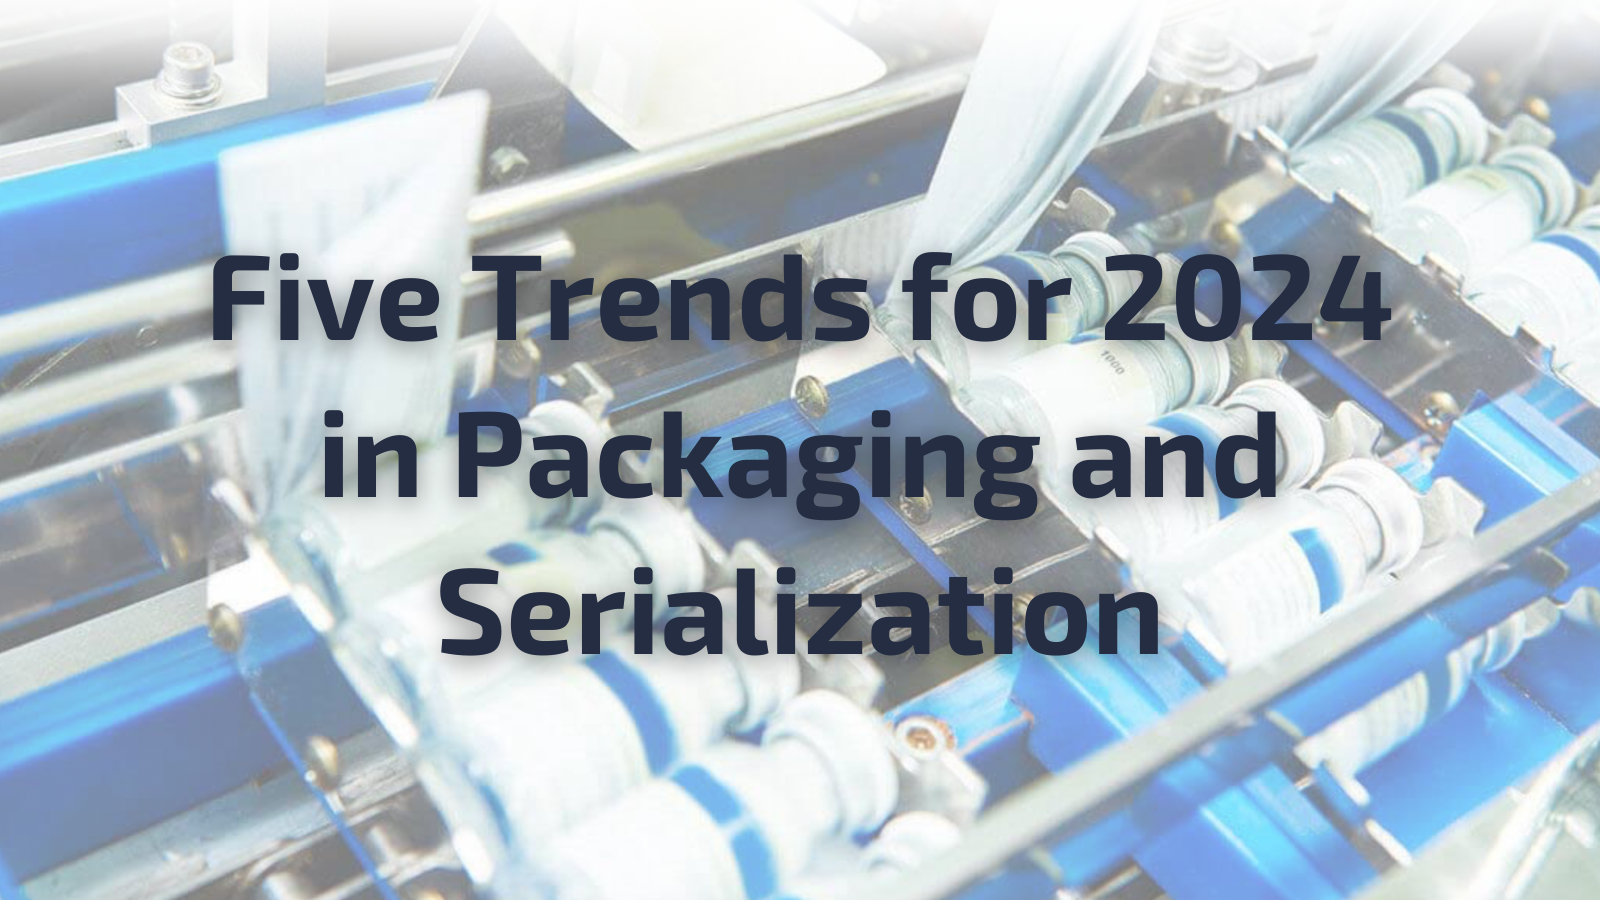 Five Trends for 2024 in Packaging and Serialization